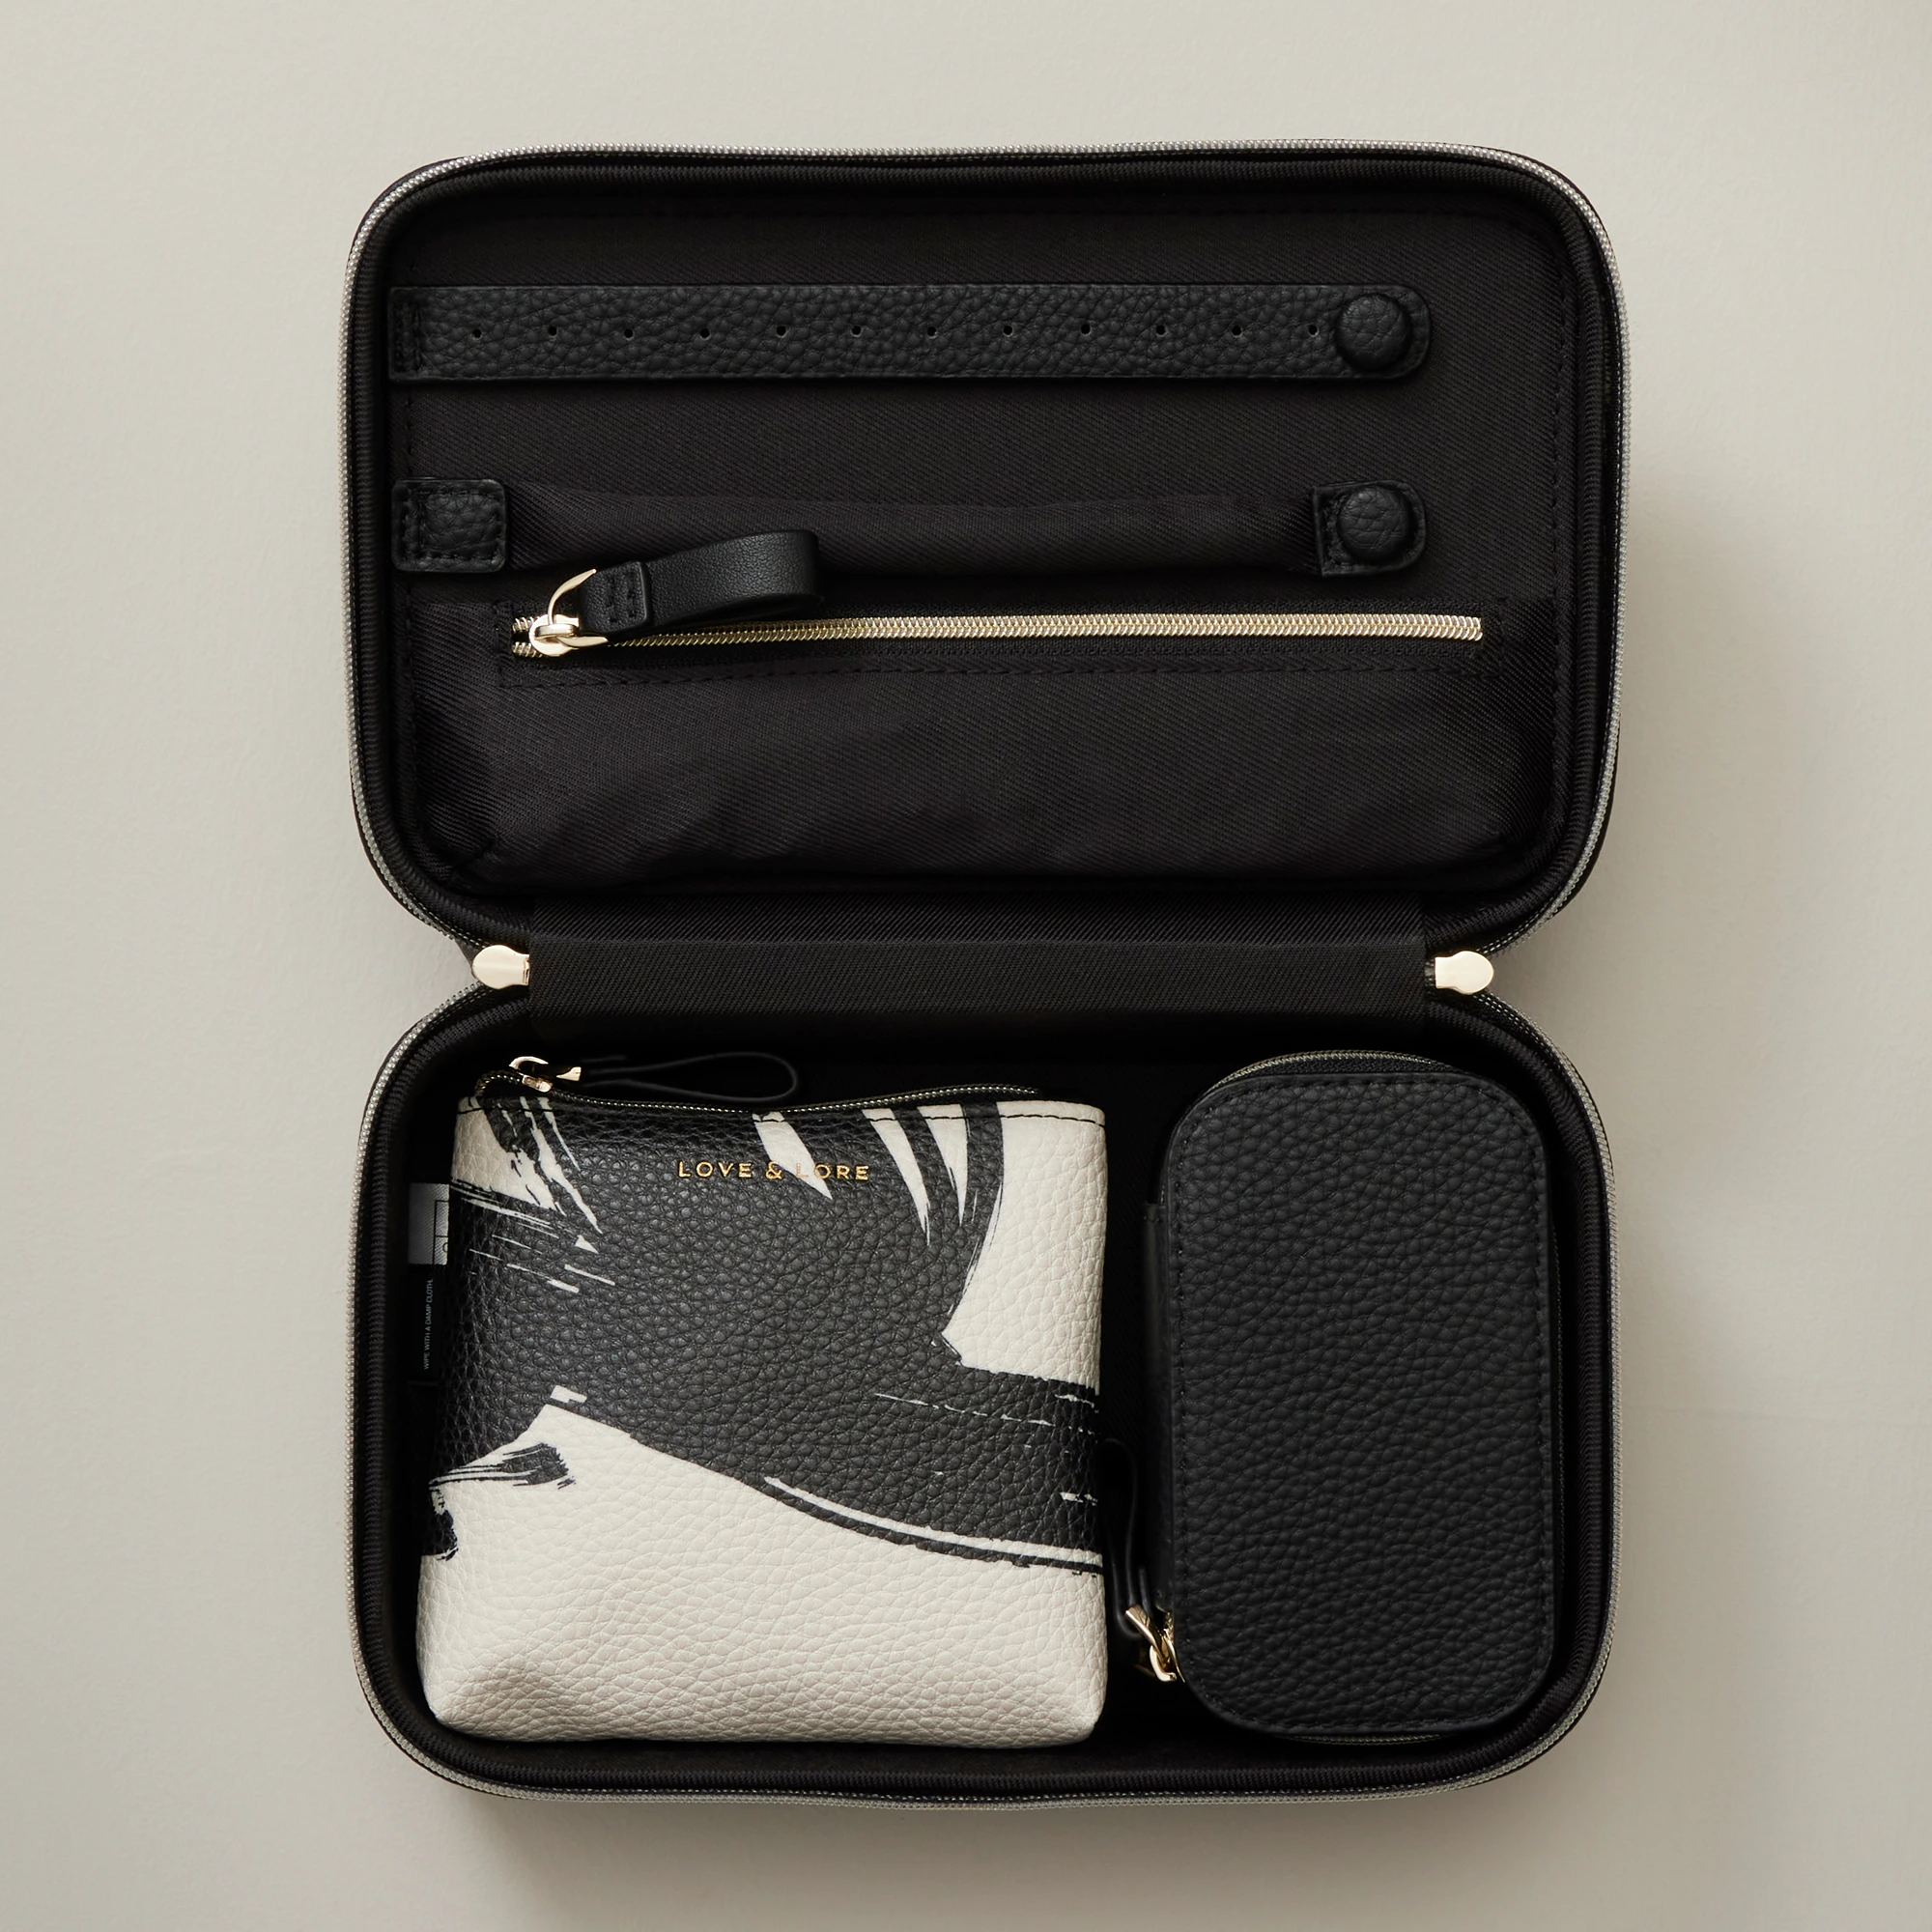 An open faux leather jewellery case with smaller fabric bags inside